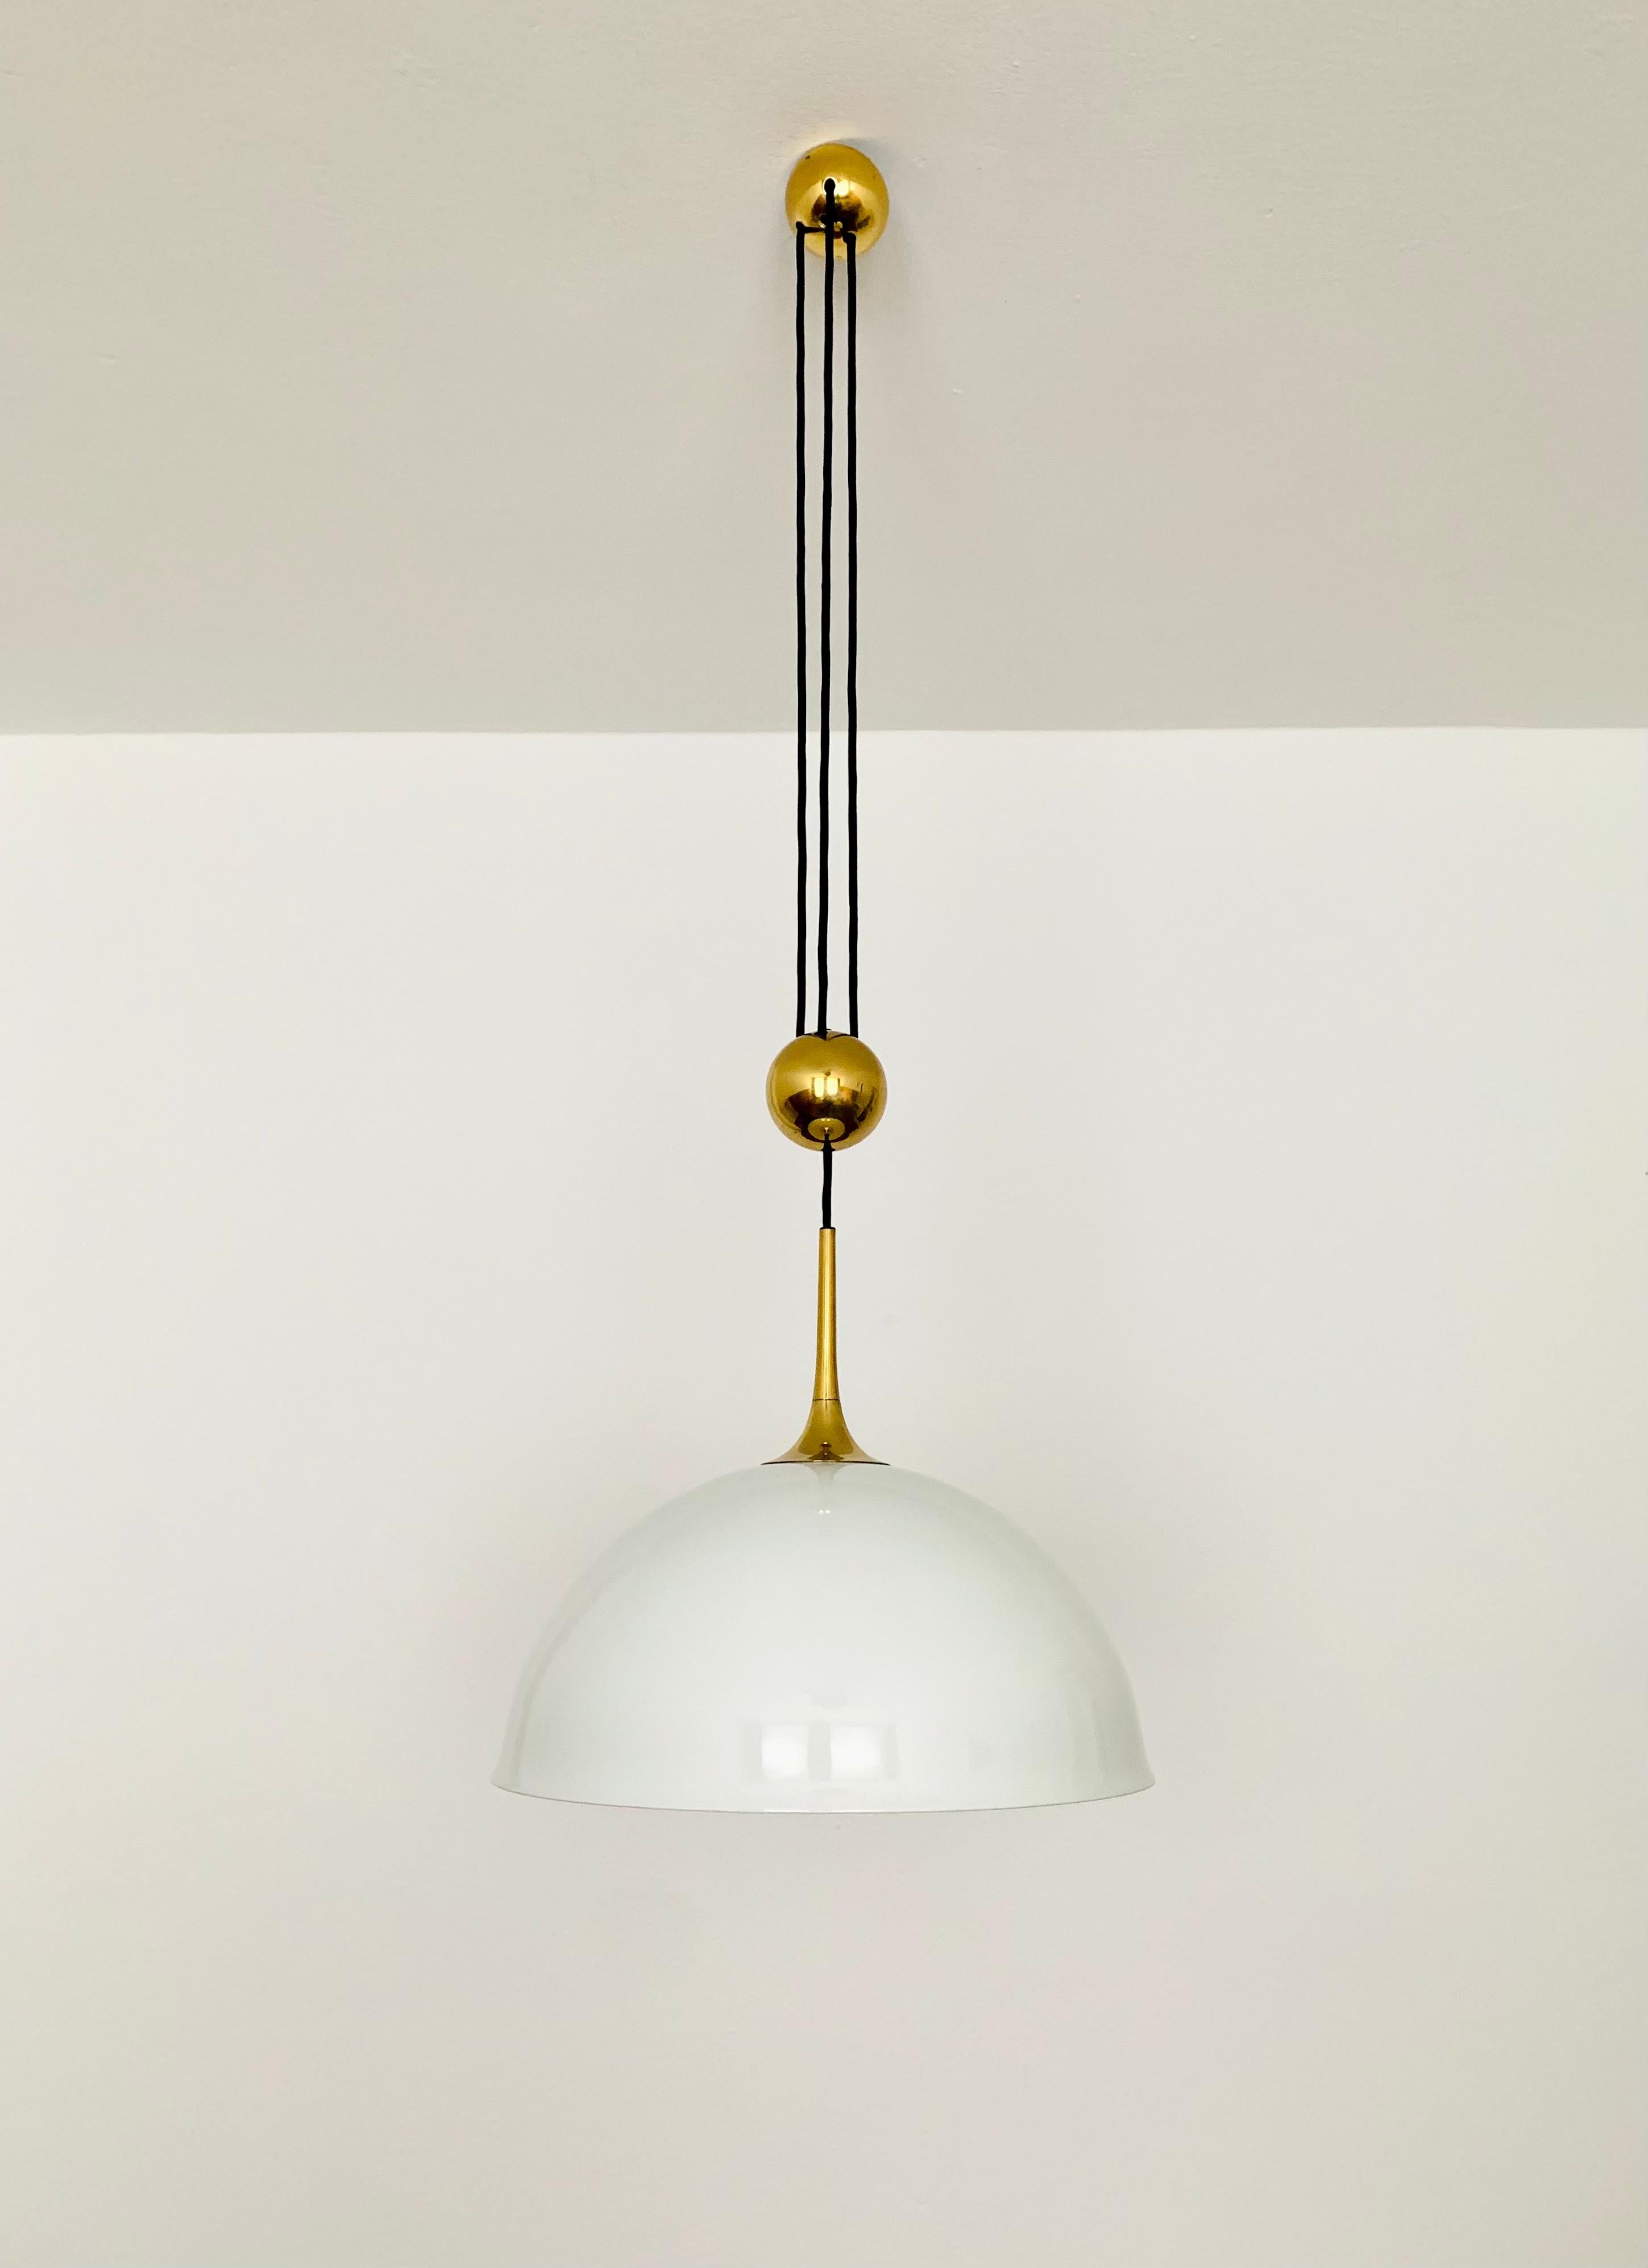 German Posa pendant lamp with porcelain shade by Florian Schulz For Sale